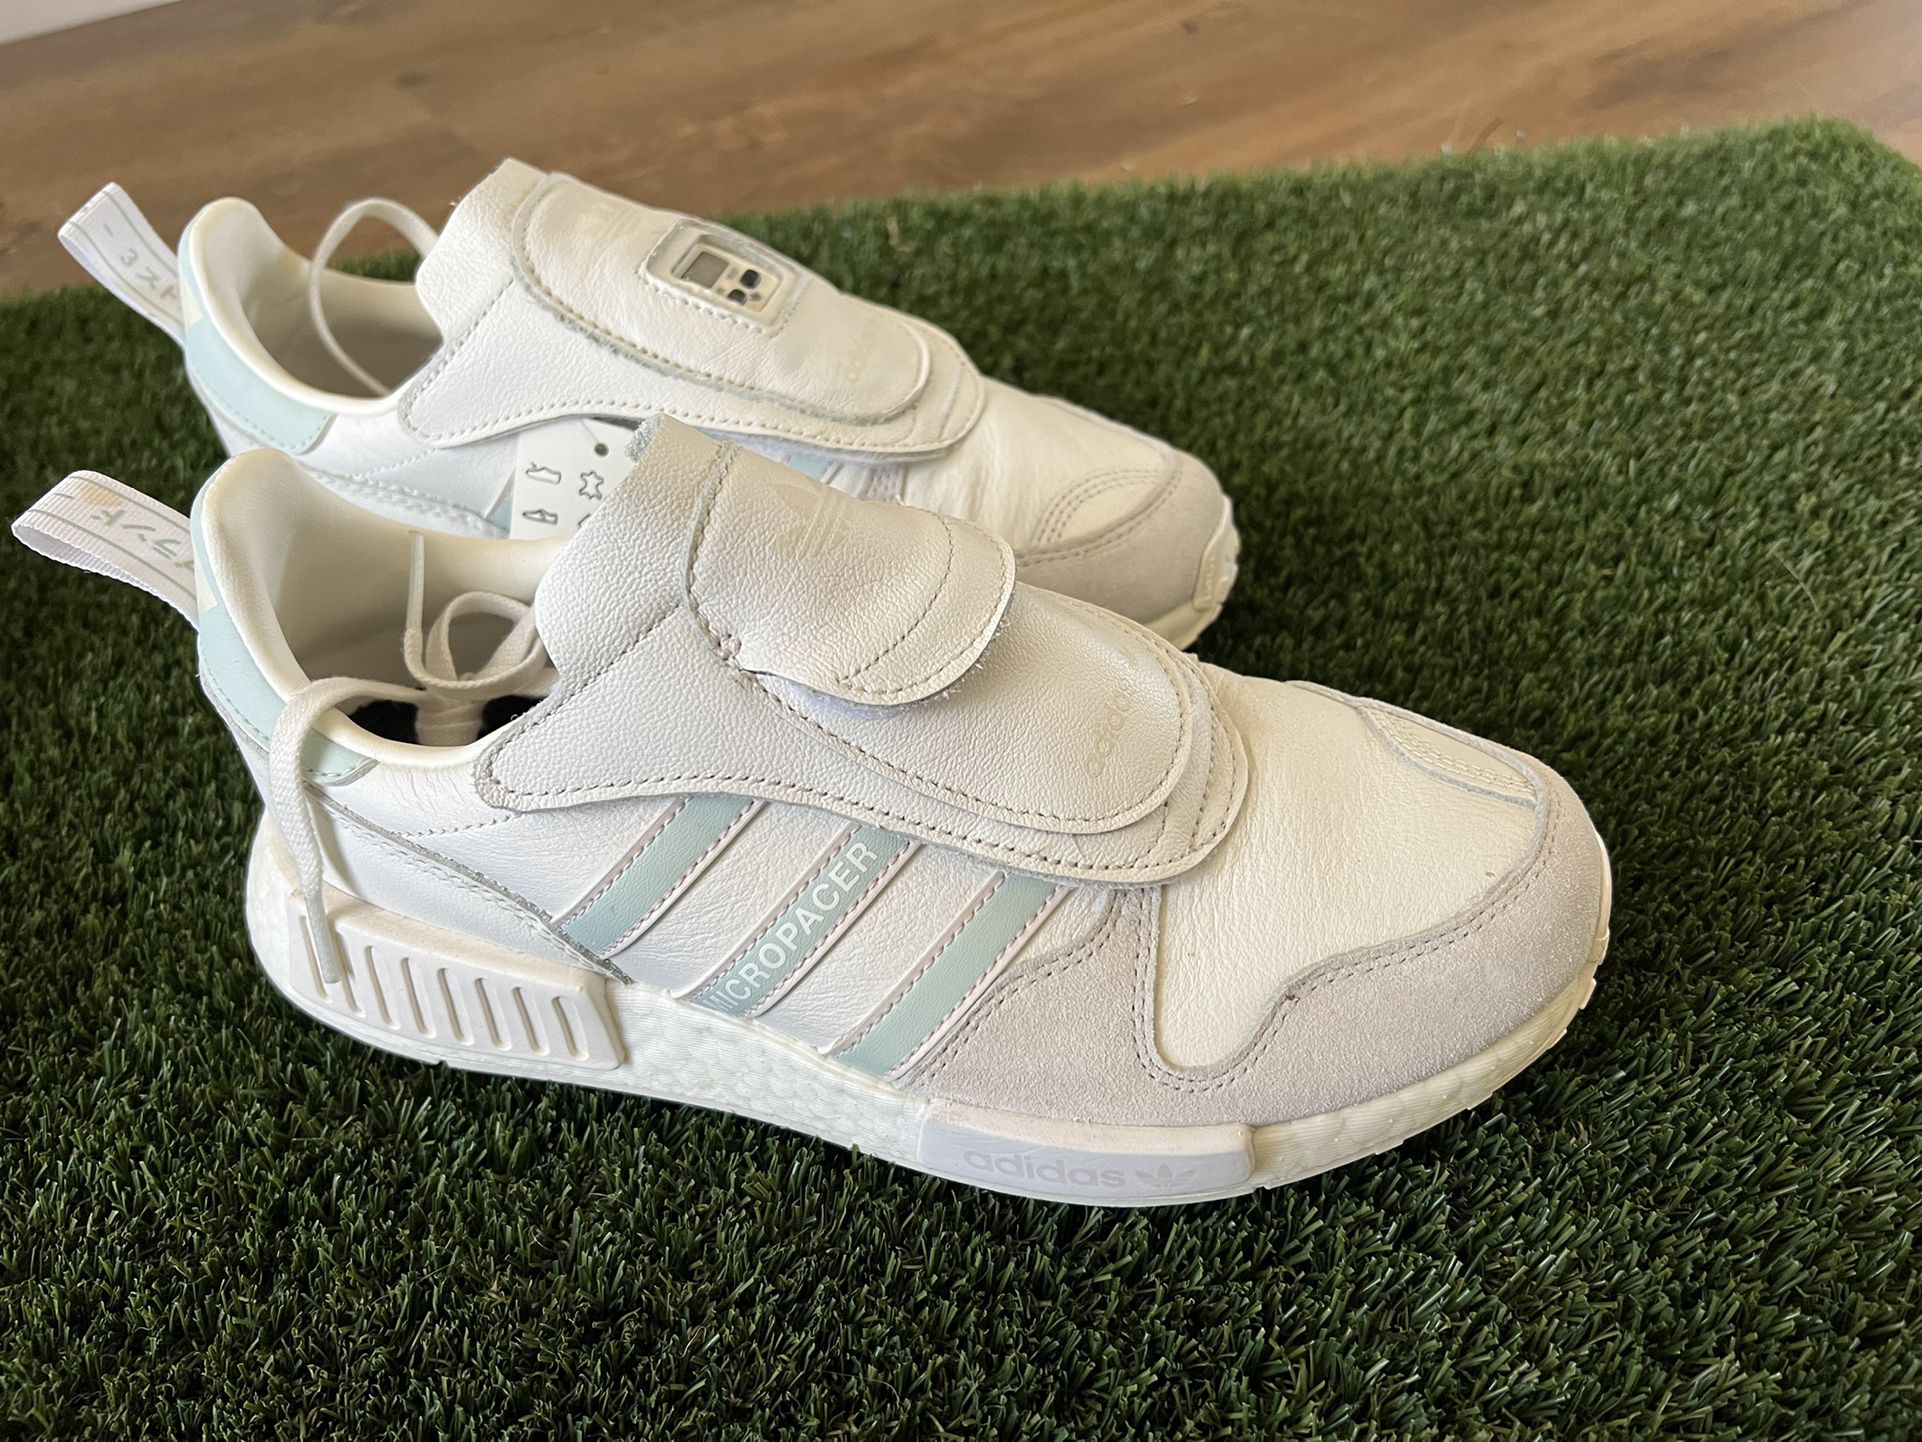 adidas Micropacer R1 (Never Made Pack Triple White) for in Mirada, CA OfferUp